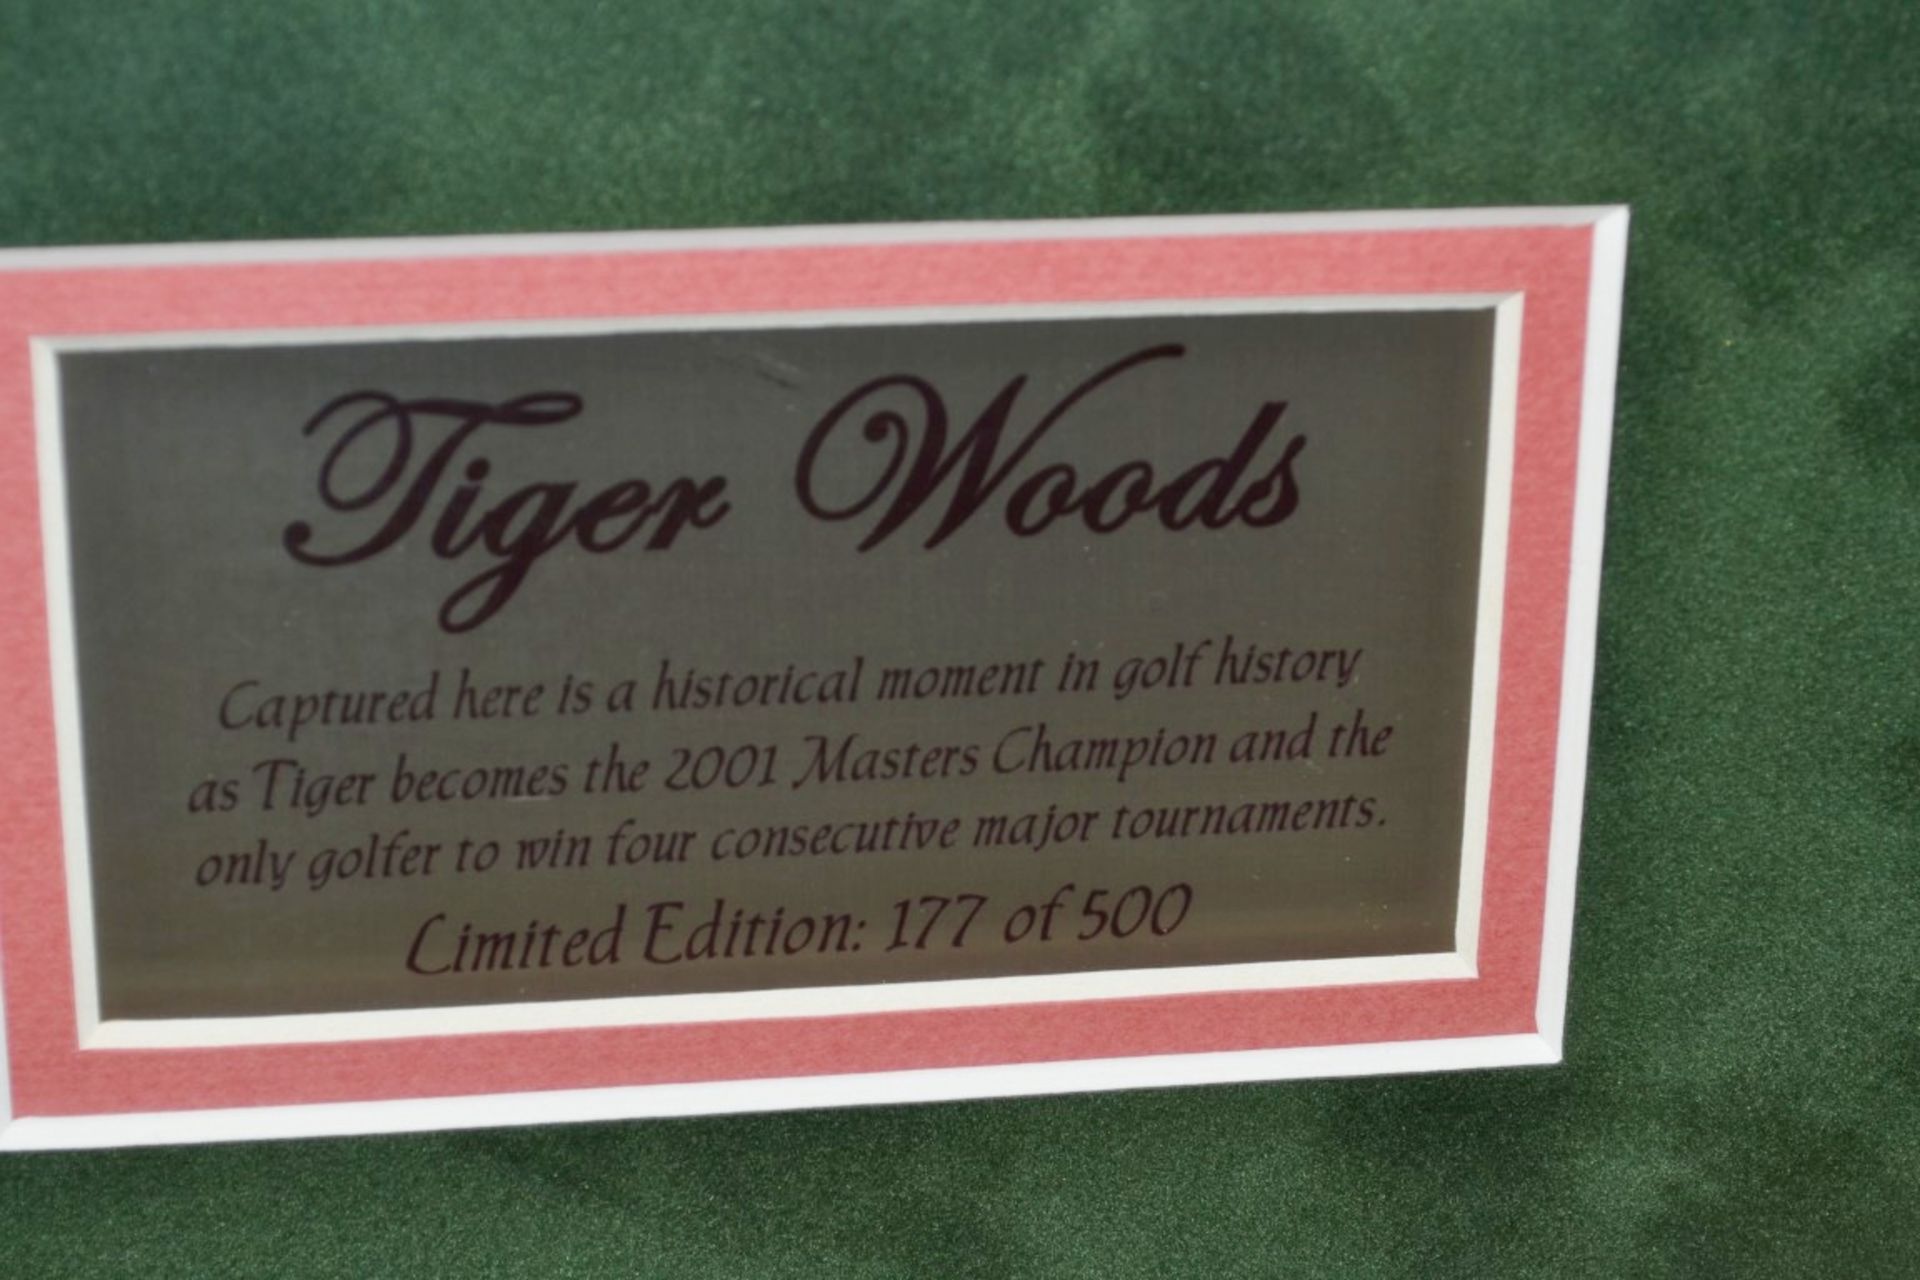 1 x Genuine Limited Edition Photograph Of Tiger Woods (Unsigned) - No. 177 of 500 - Guarantee Of - Image 3 of 7